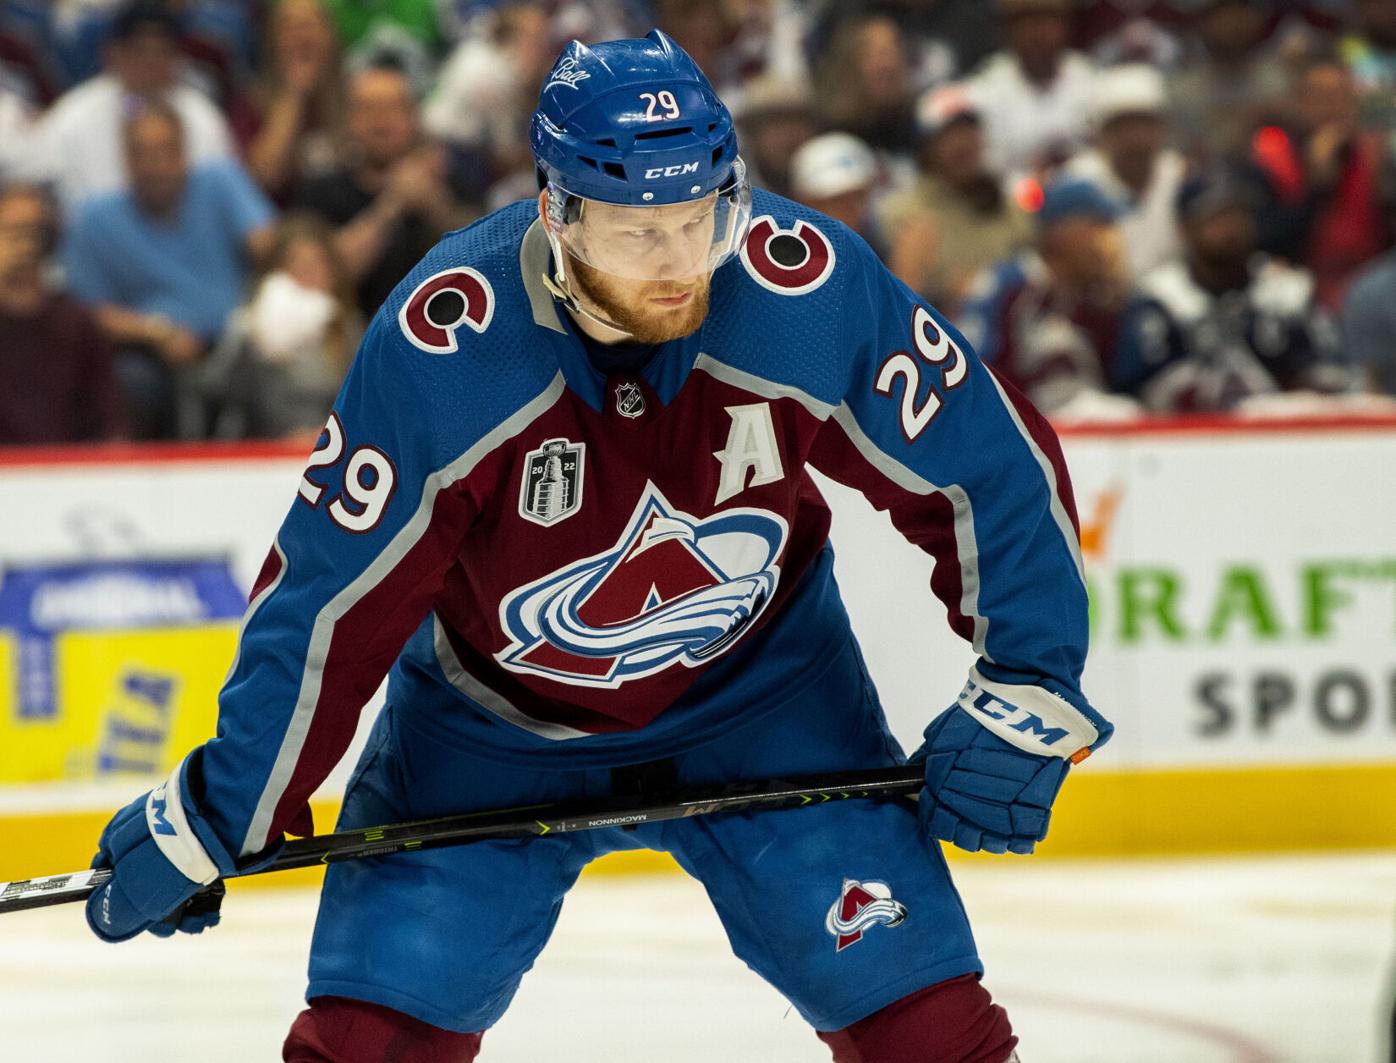 MacKinnon's silly decision could derail the Avalanche's cup dreams